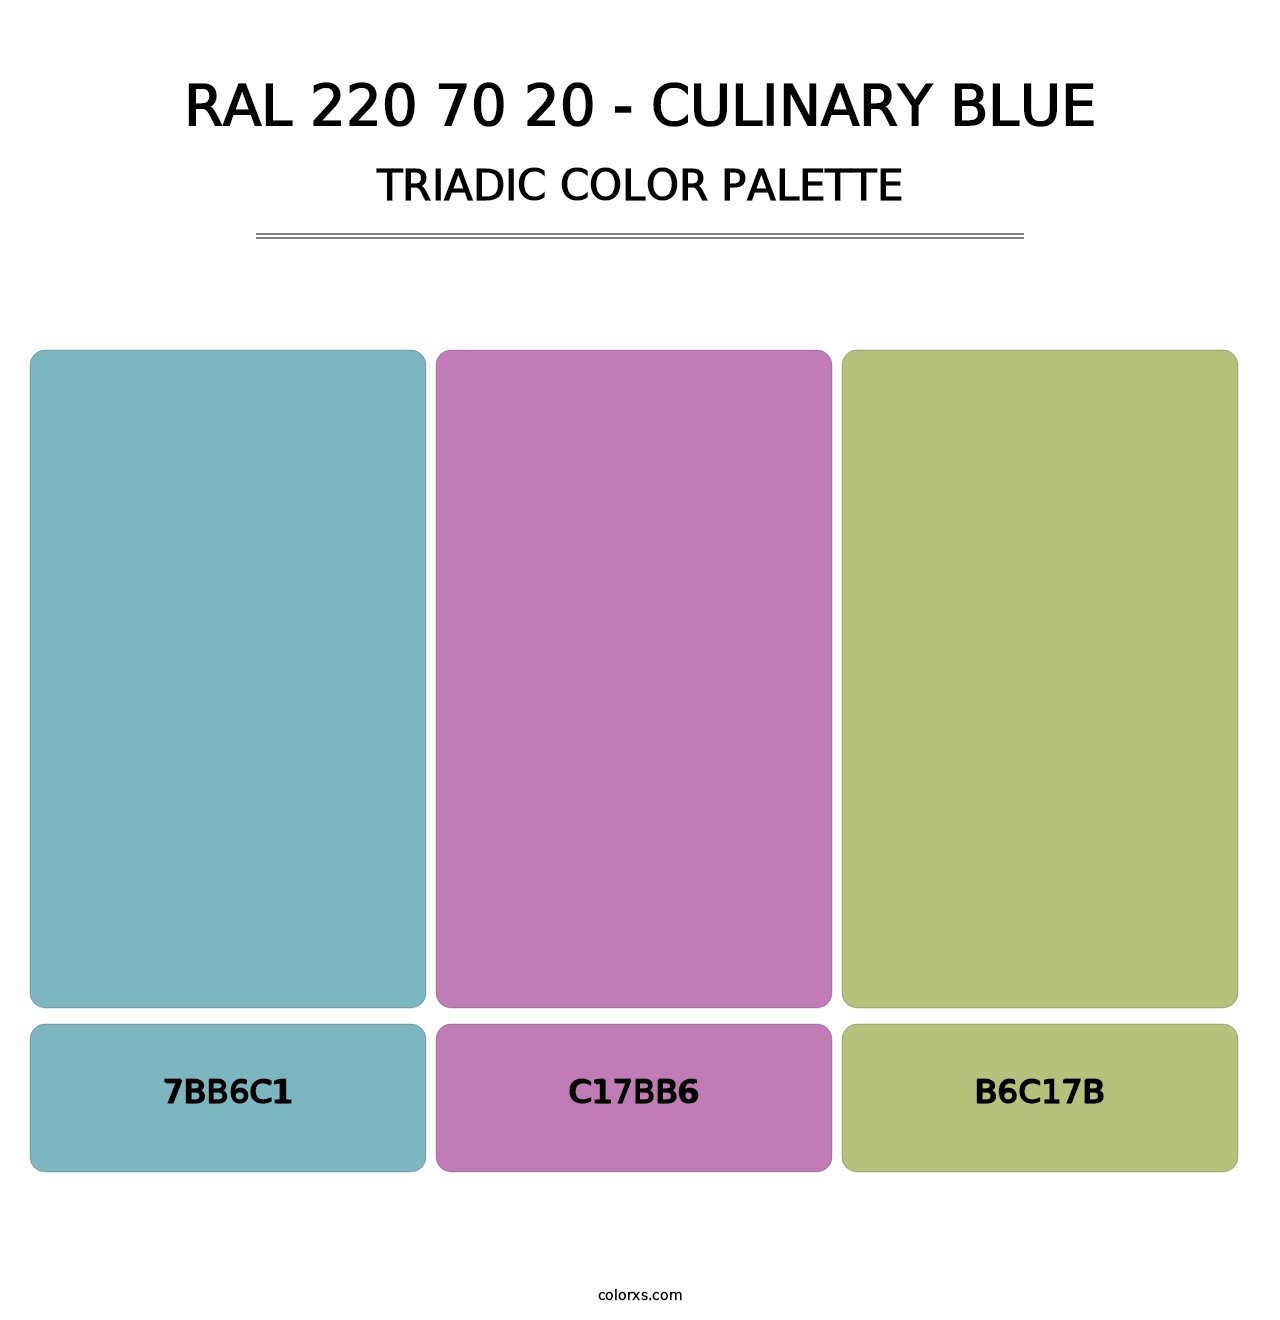 RAL 220 70 20 - Culinary Blue - Triadic Color Palette